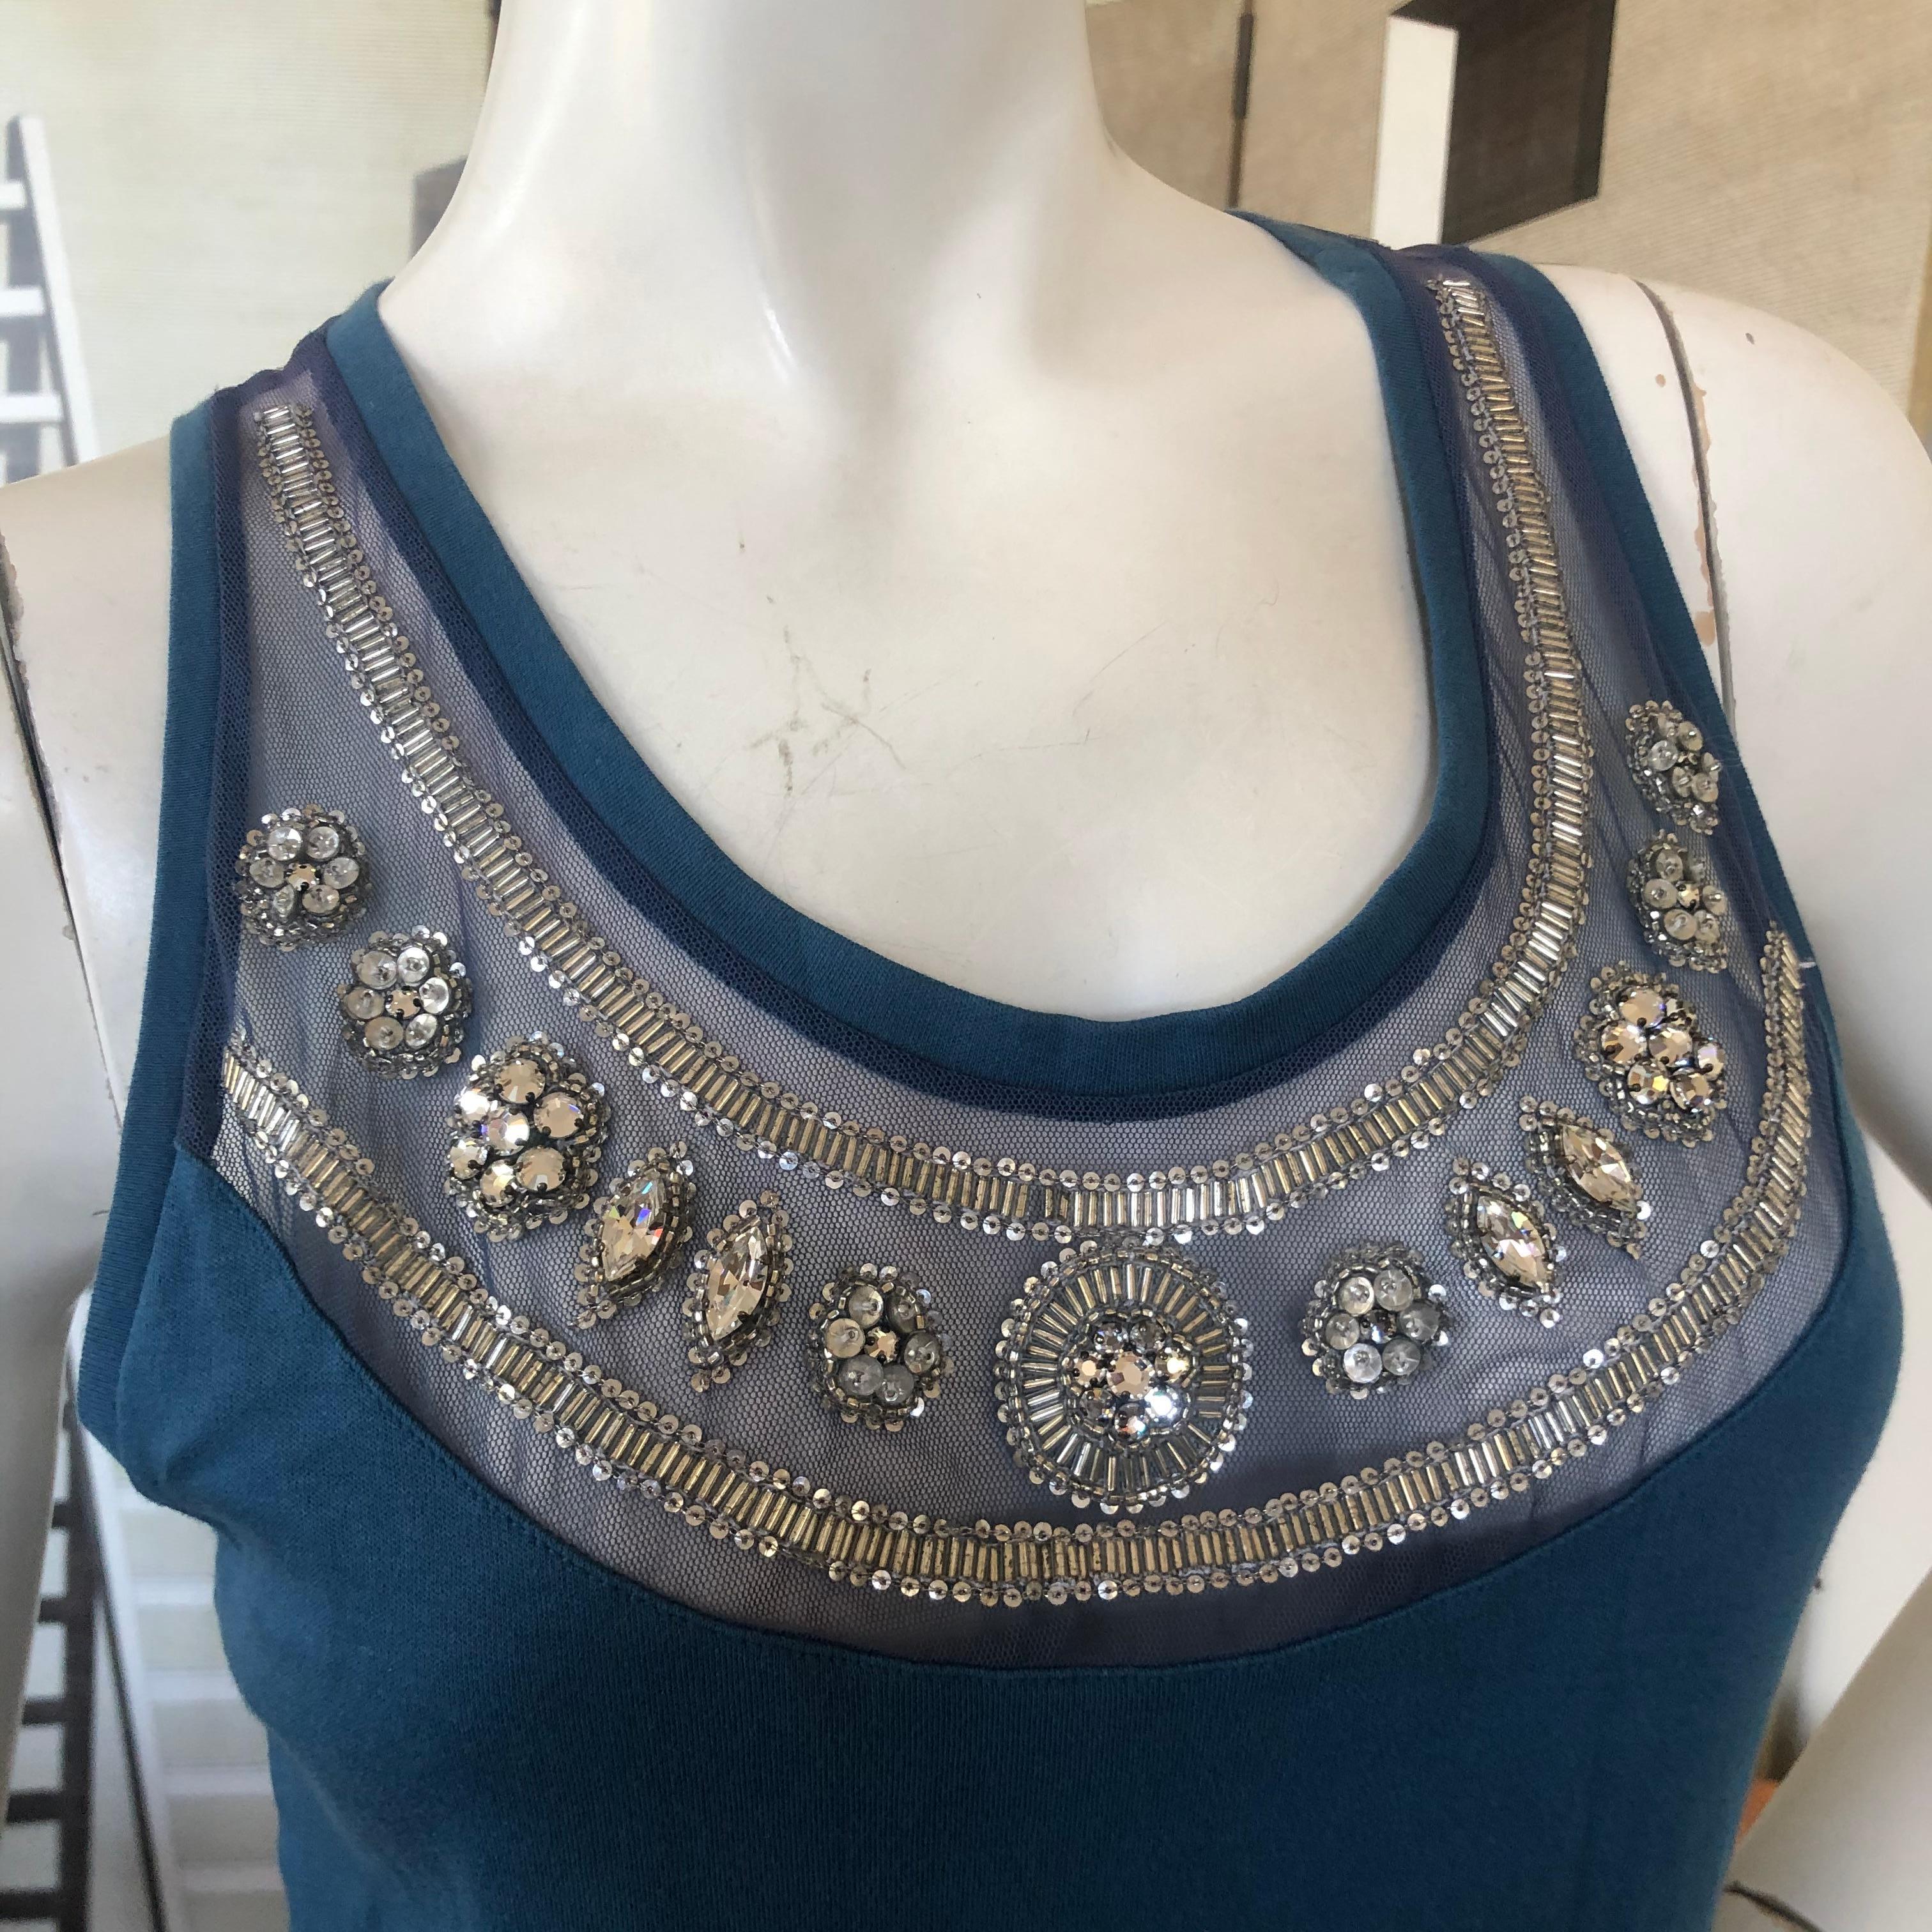 Christian Dior Crystal Embellished Evening Top by John Galliano For Sale 2